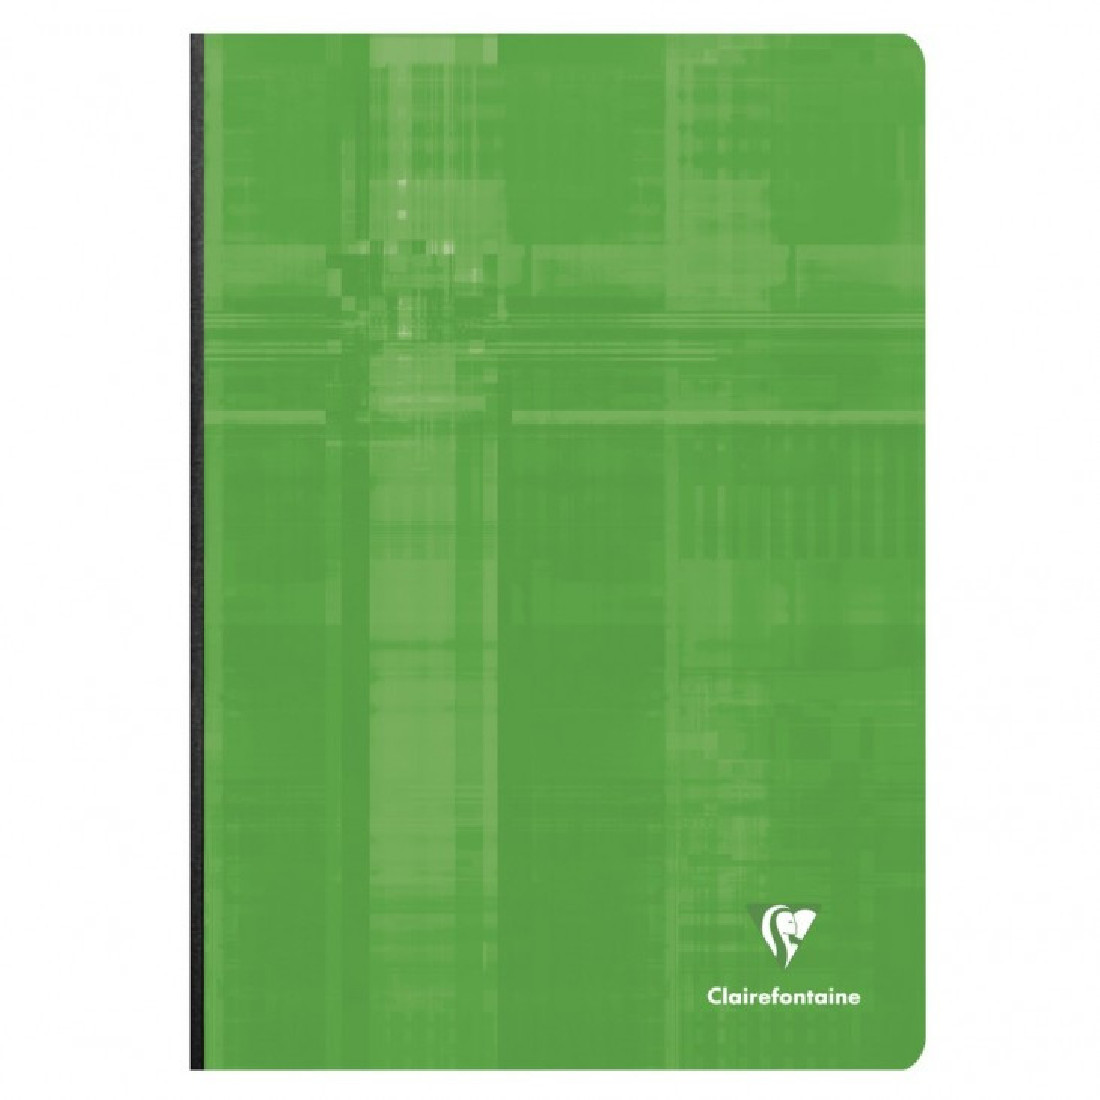 Clairefontaine notebook clothbound A4 21X29,7cm, lined without margin, 192 pages, 90g, 9146 green